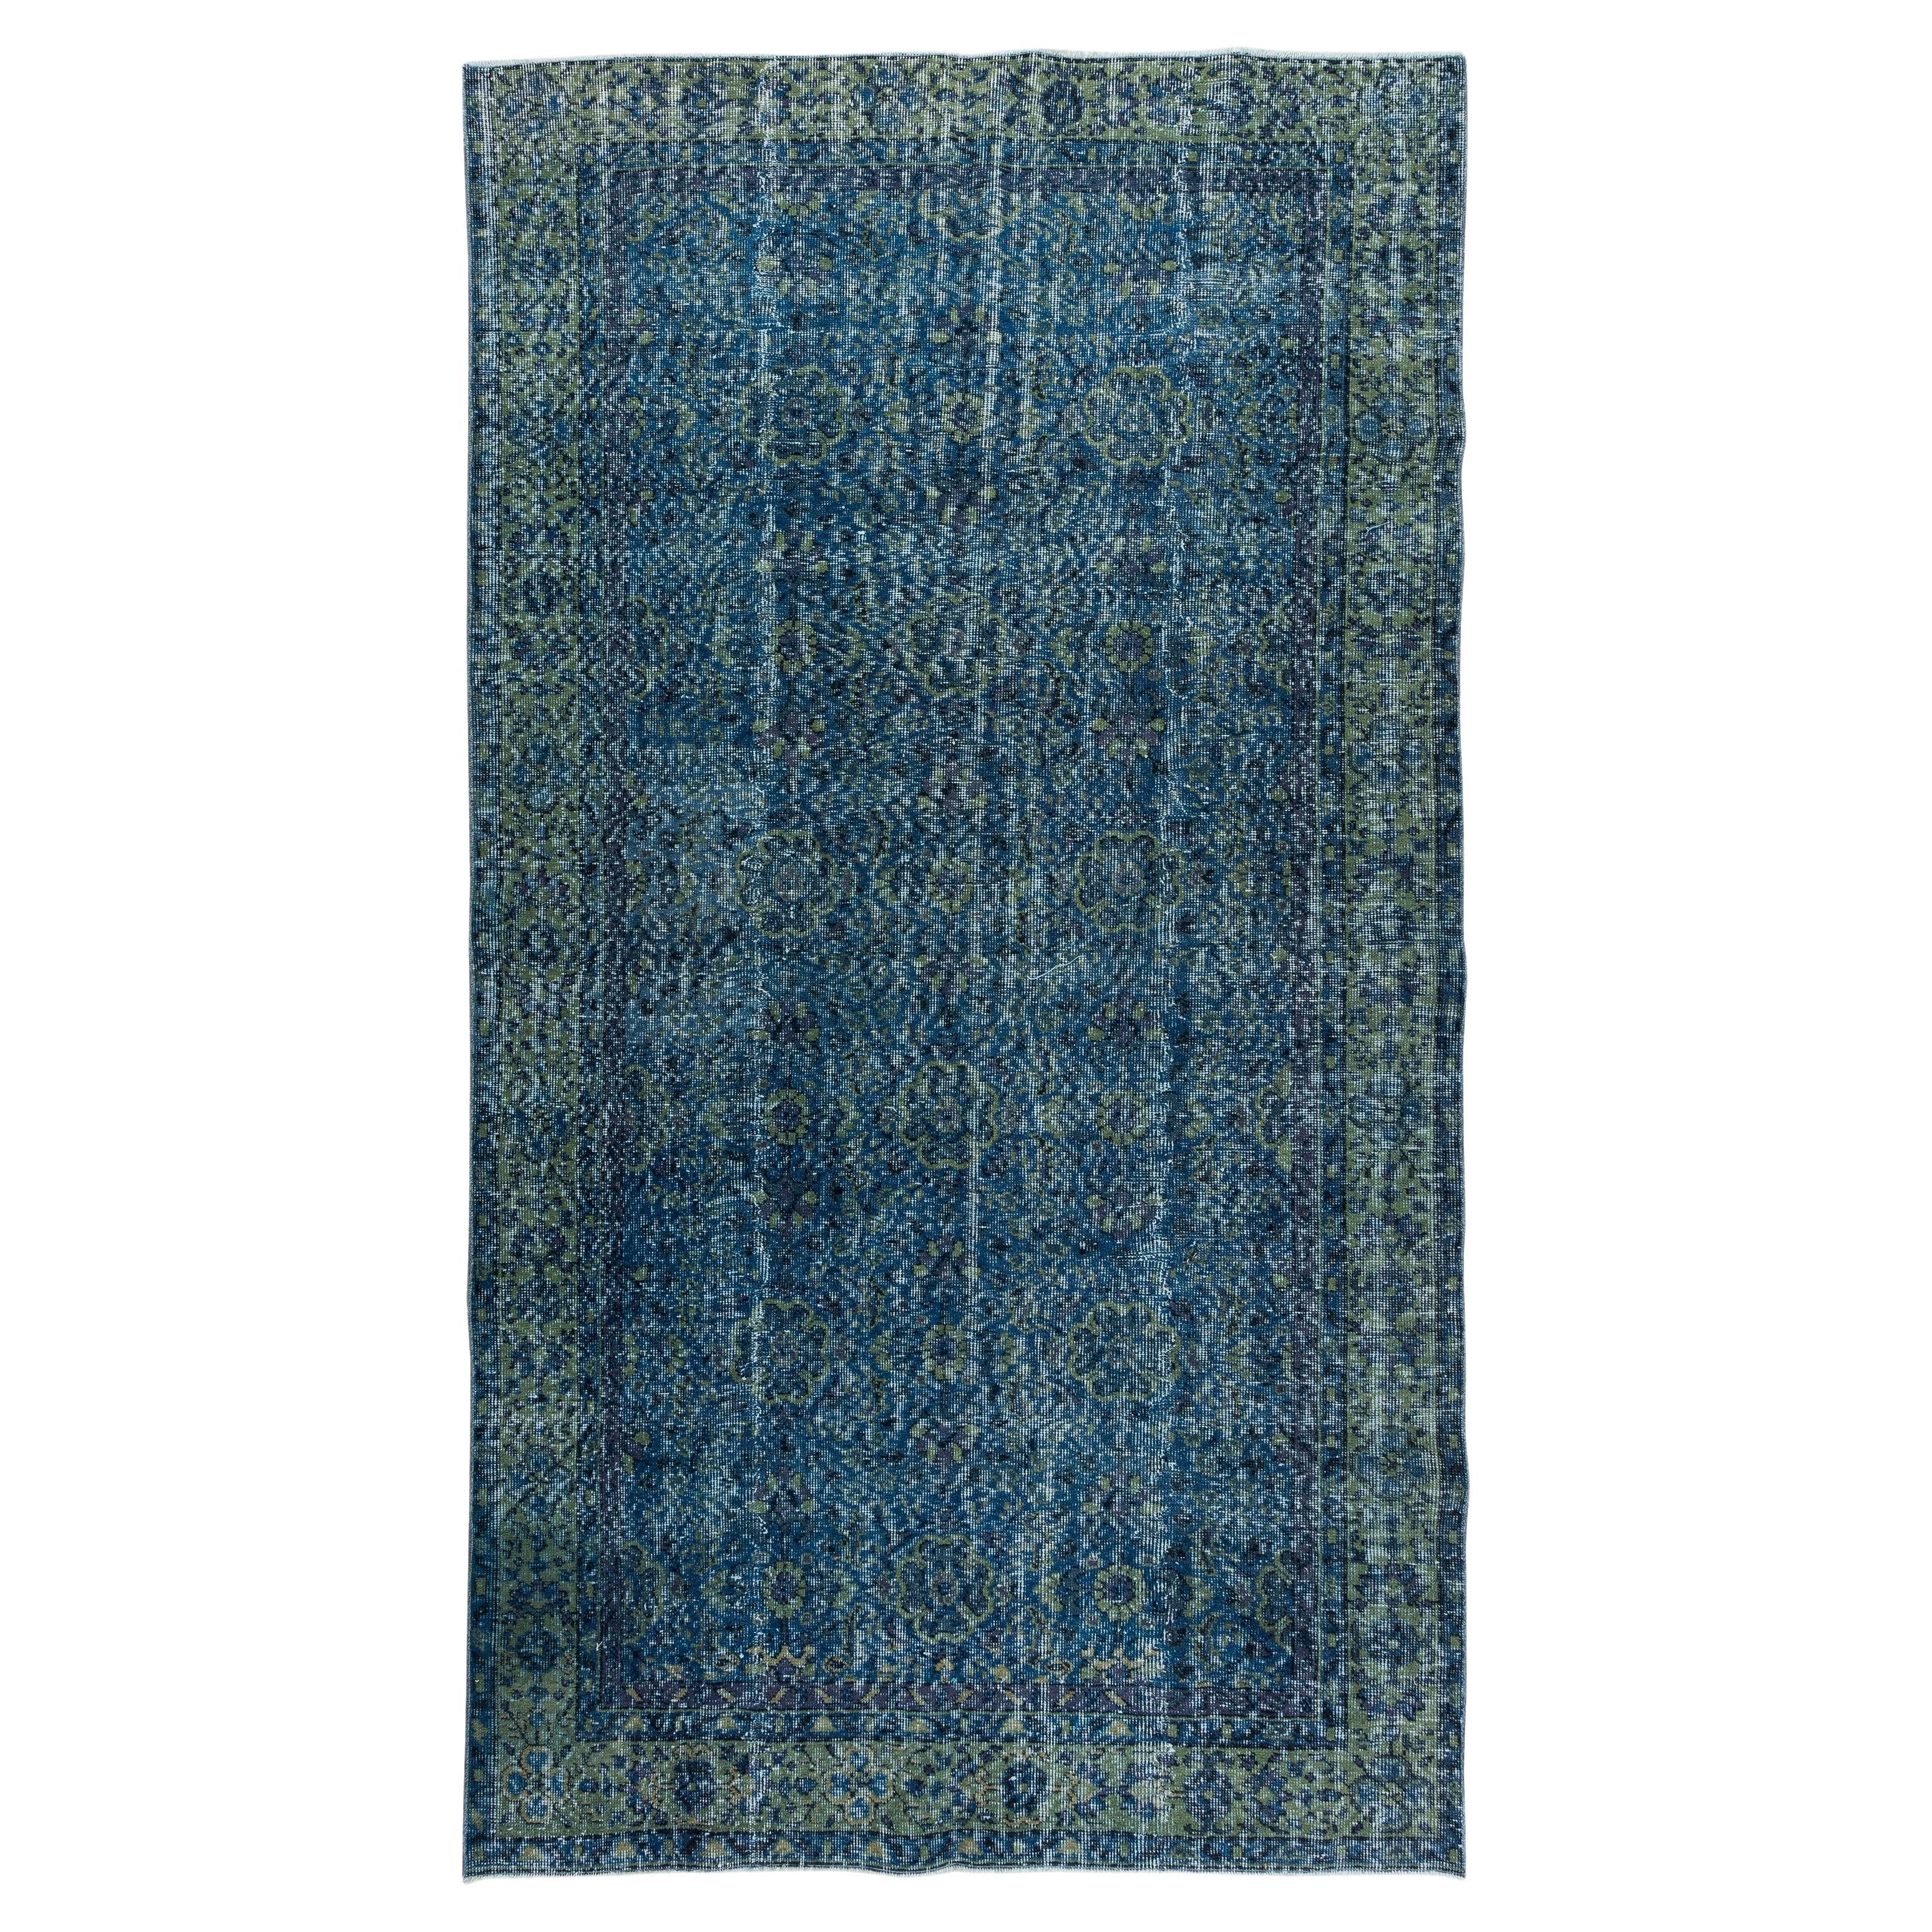 5.5x9.9 Ft Contemporary Blue Over-Dyed Rug, Handmade Vintage Turkish Wool Carpet For Sale